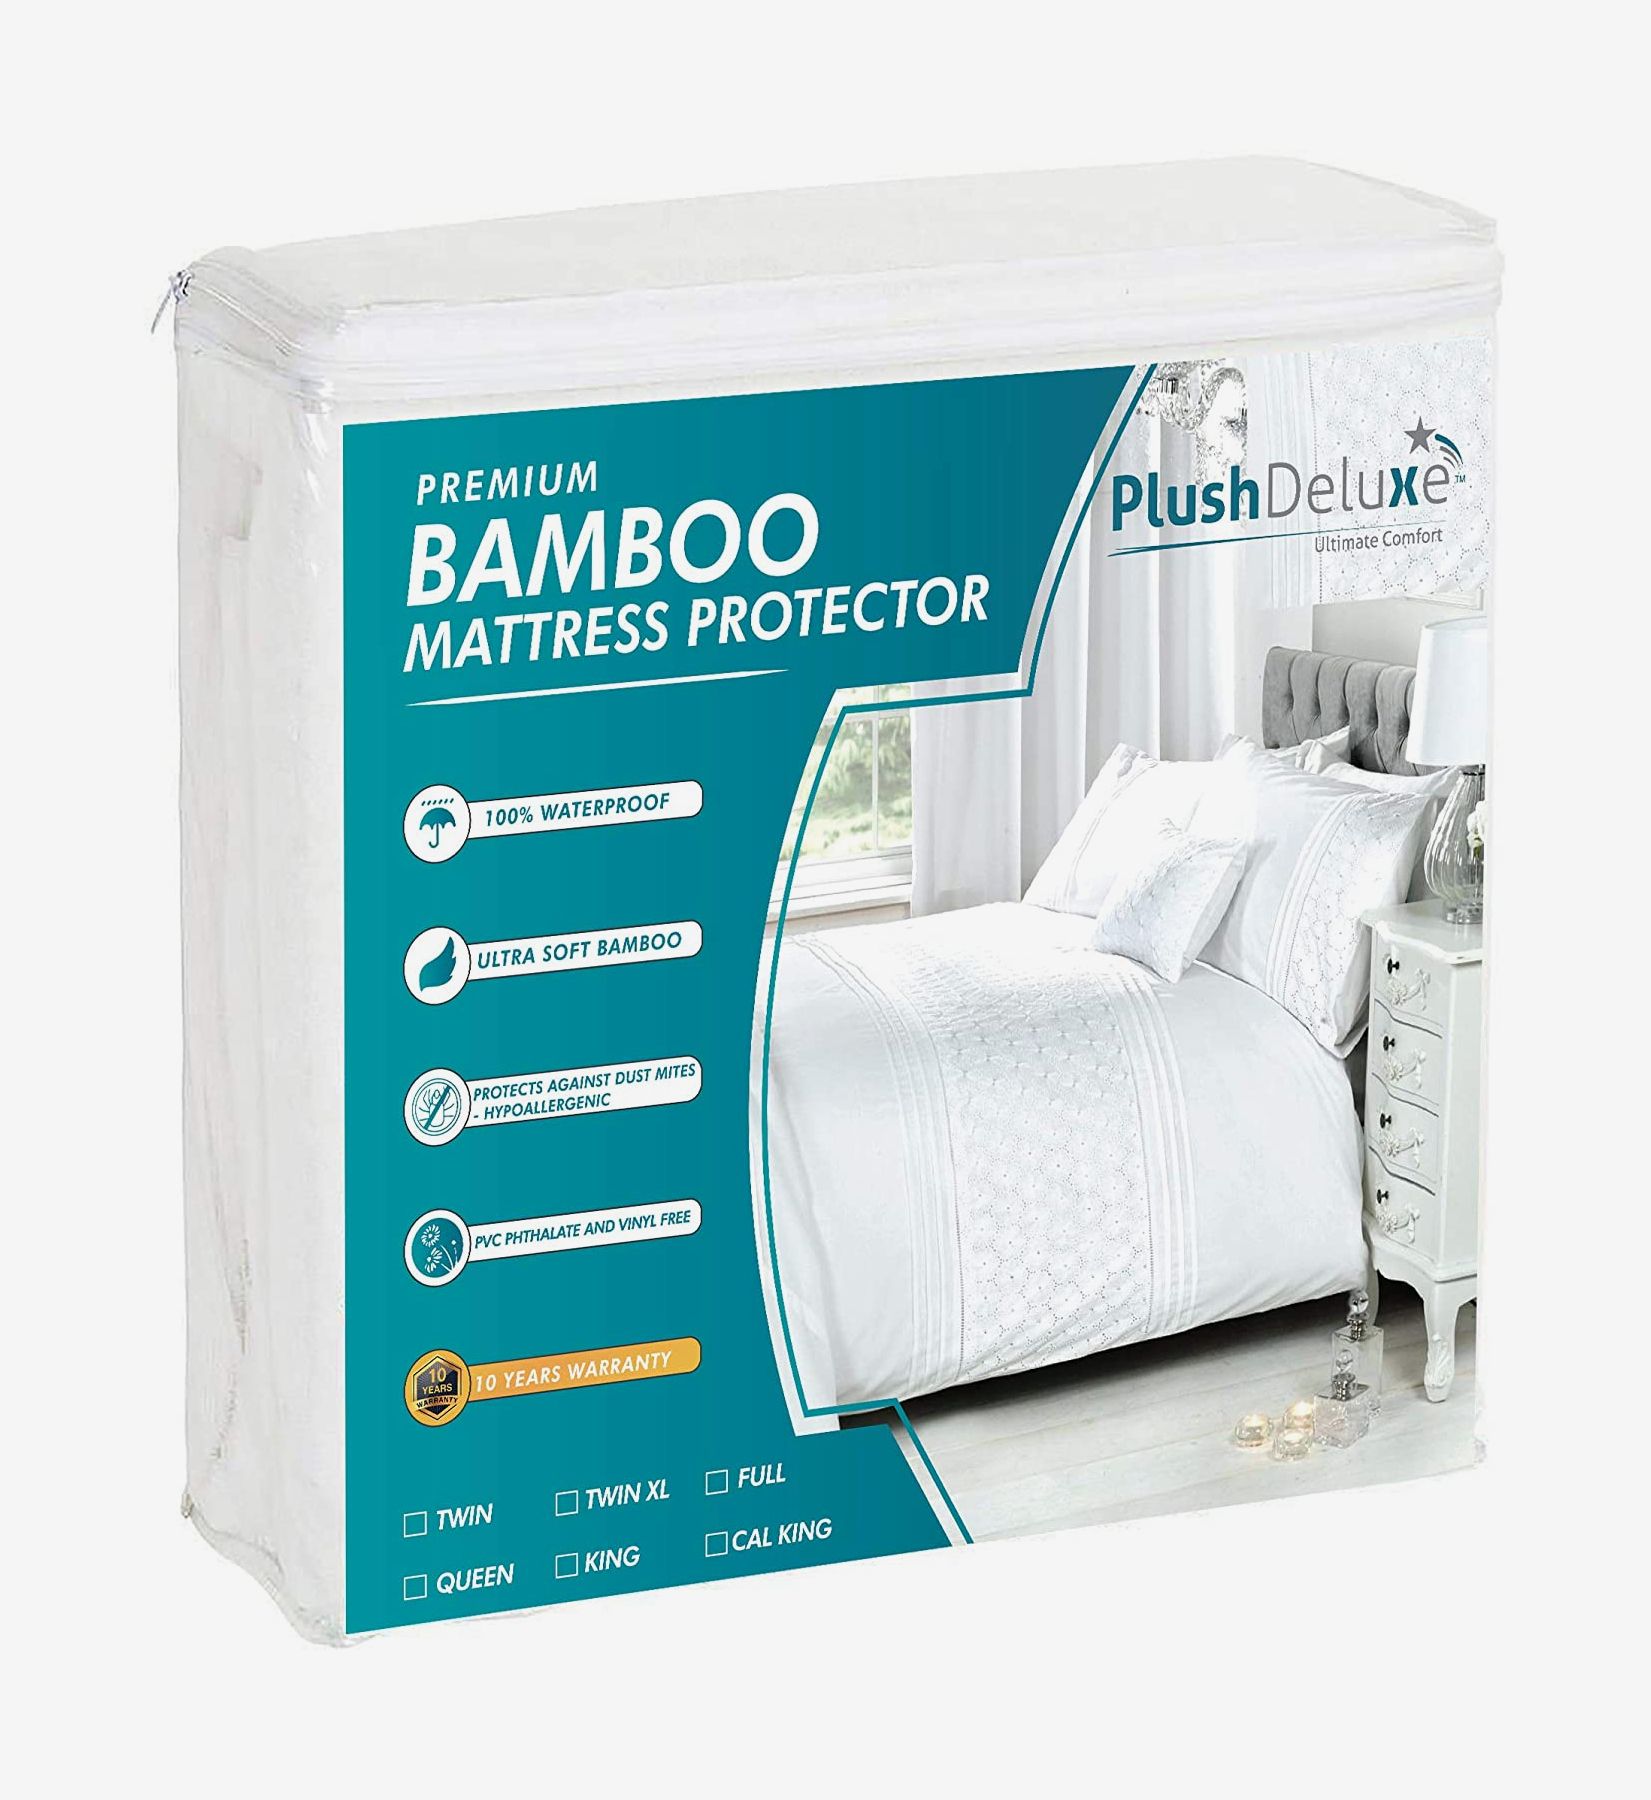 15 Best Mattress Protectors 2021 The, Waterproof Bed Sheet Protector King Size